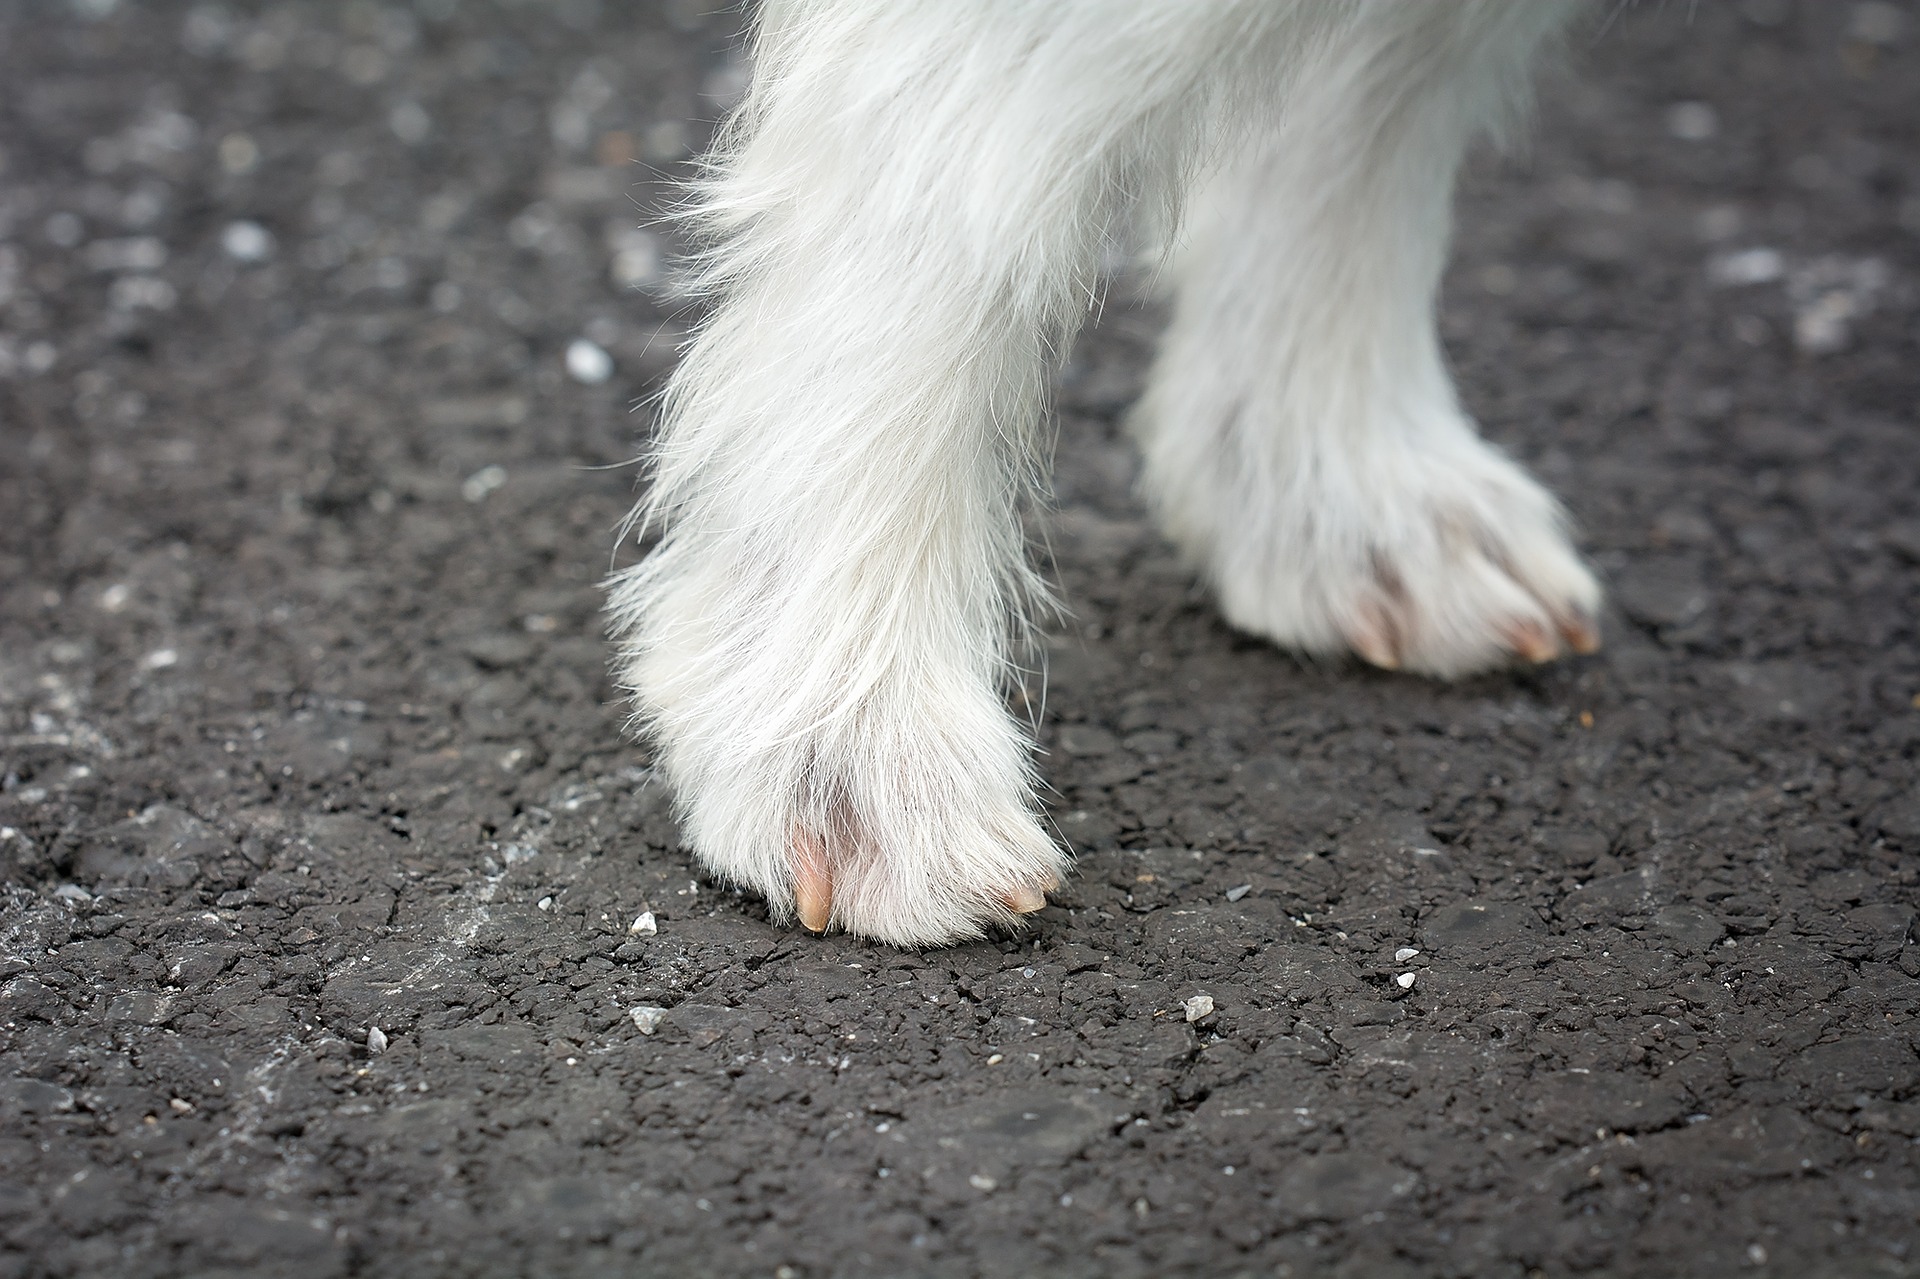 Paw pads are sensitive and can burn easily on hot surfaces—including pavement, concrete, and even sand—when the sun is out.